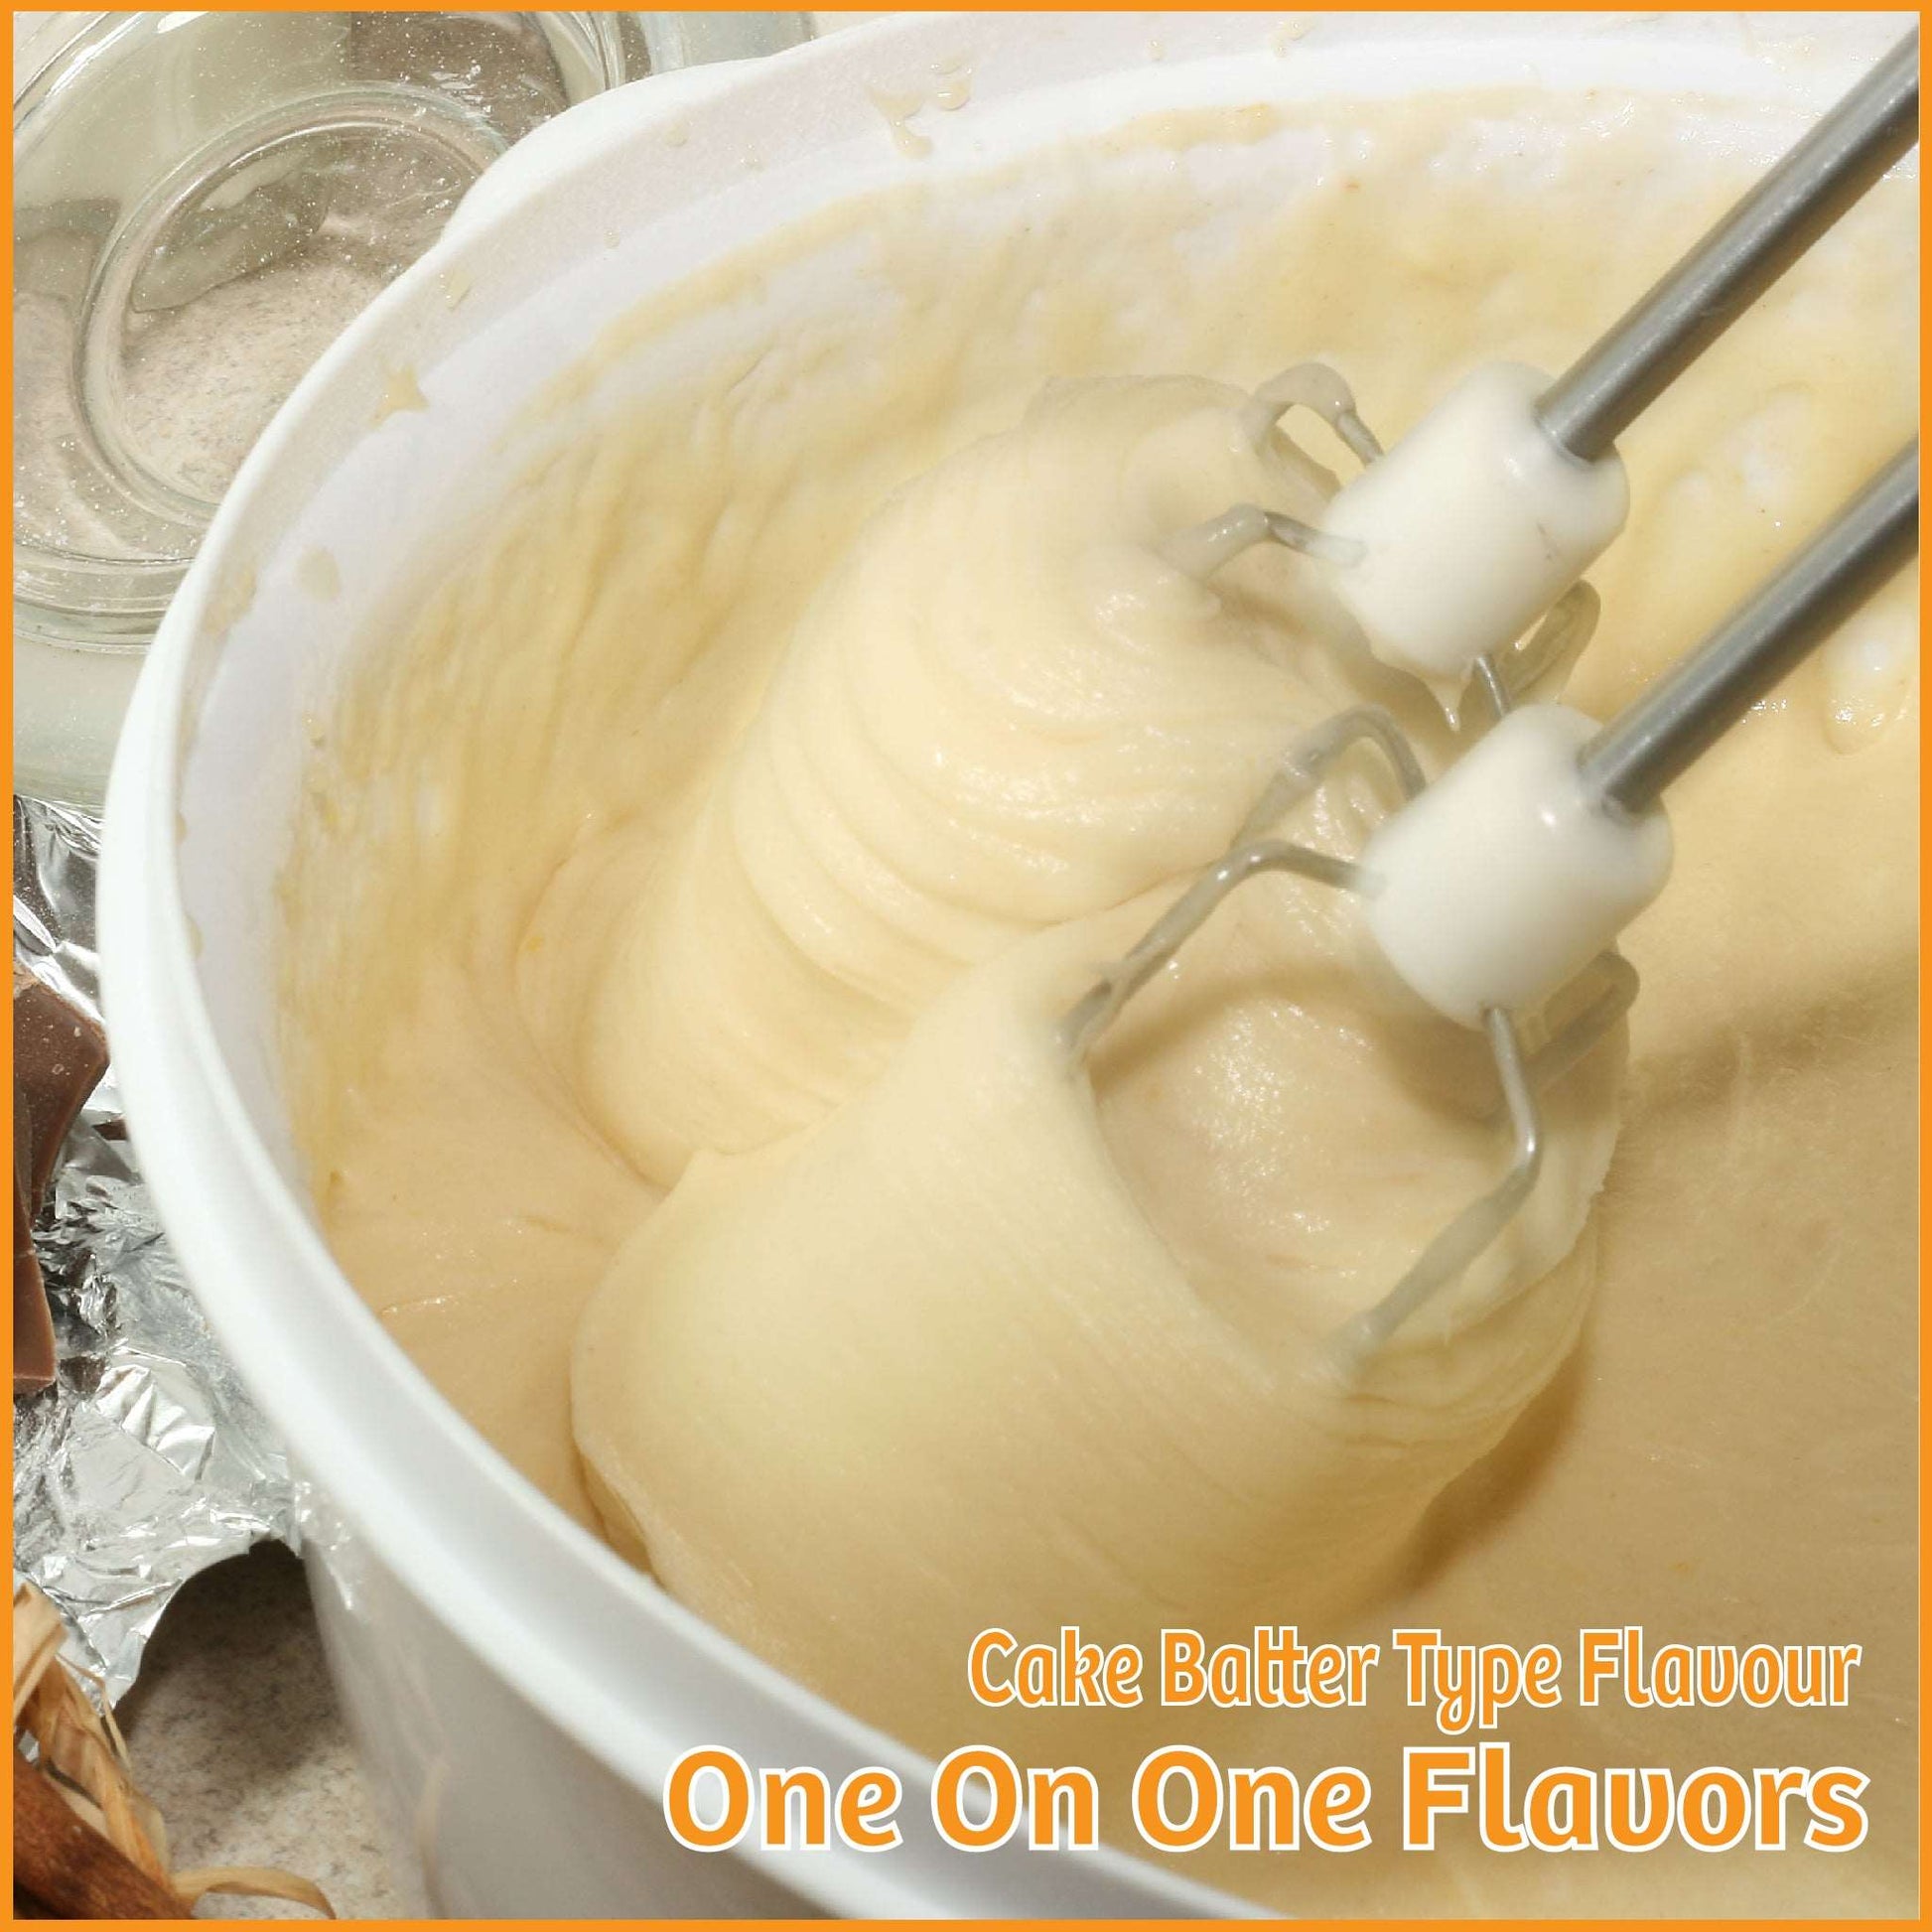 Cake Batter Type Flavour- One On One Flavors - Flavour Fog - Canada's flavour depot.